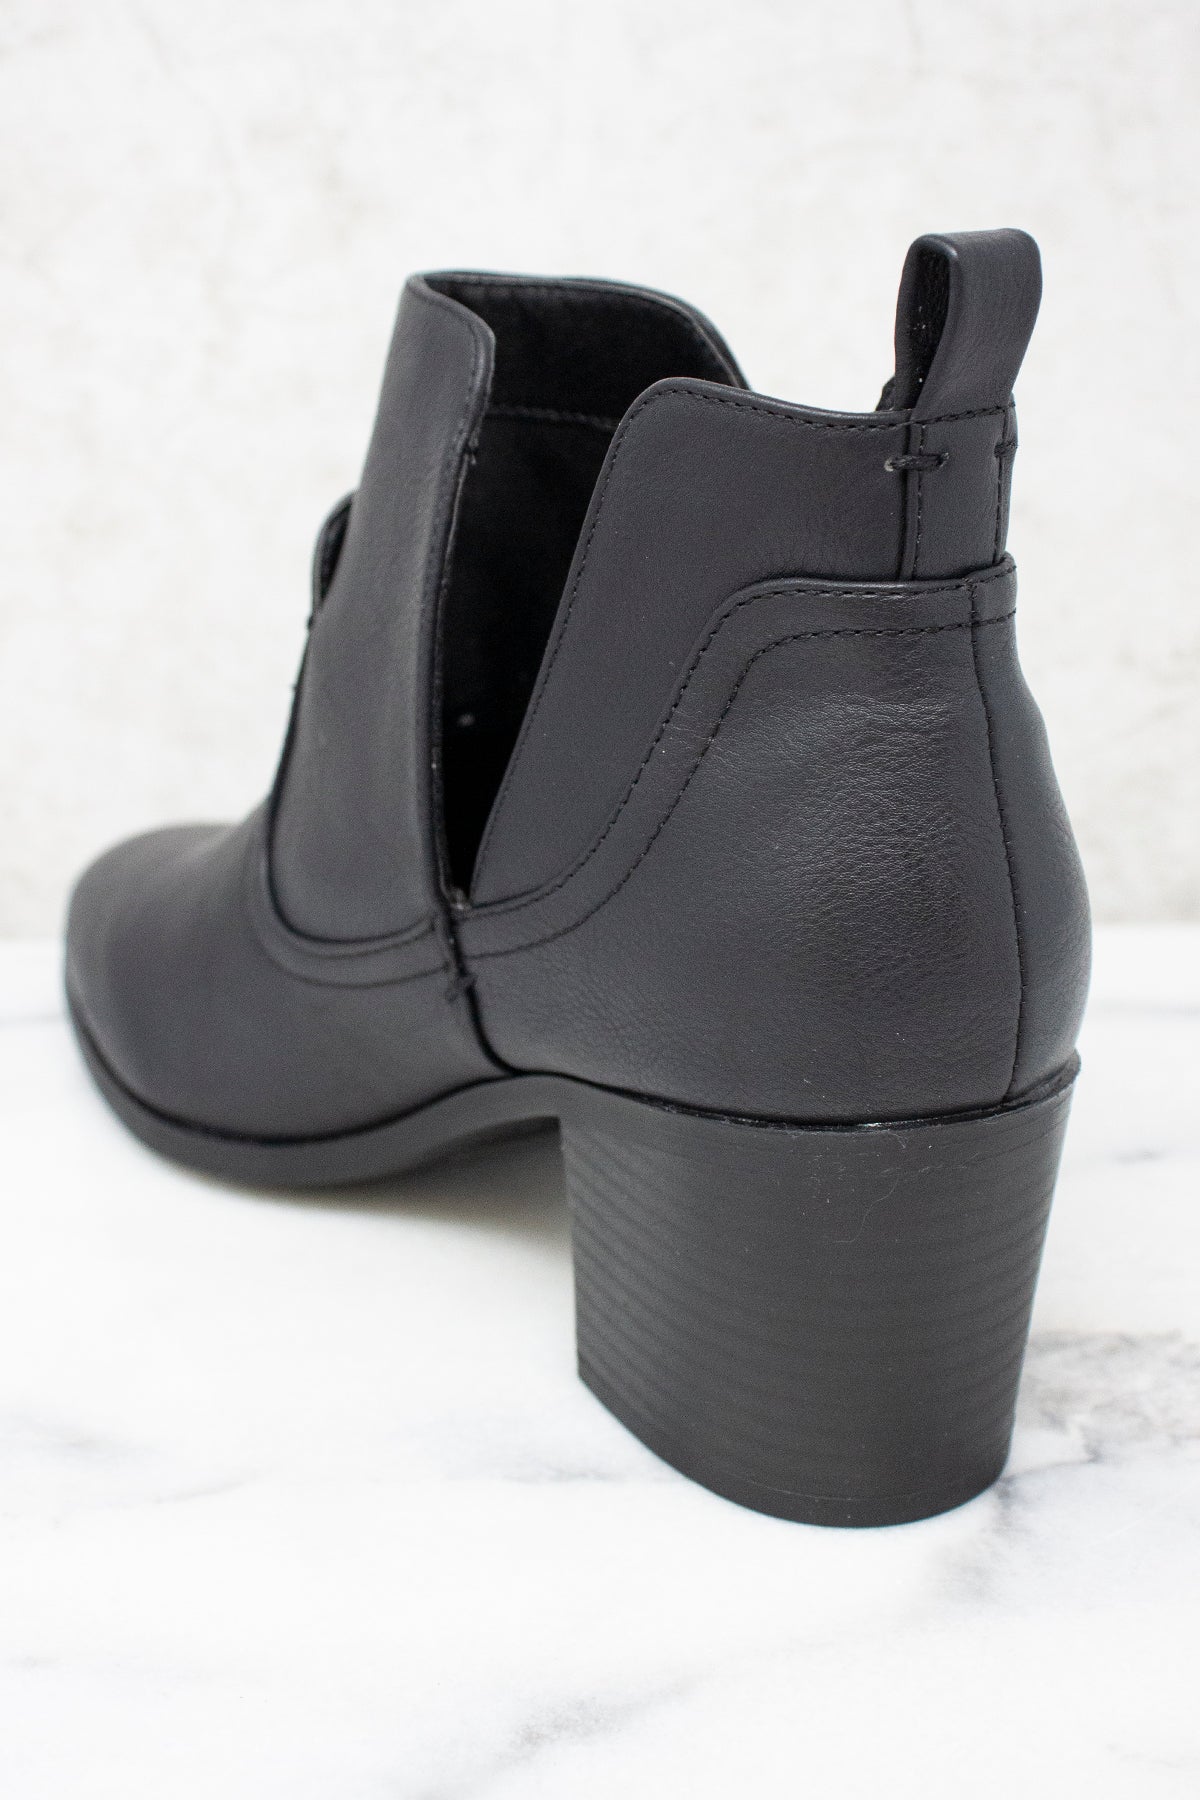 clearance black booties